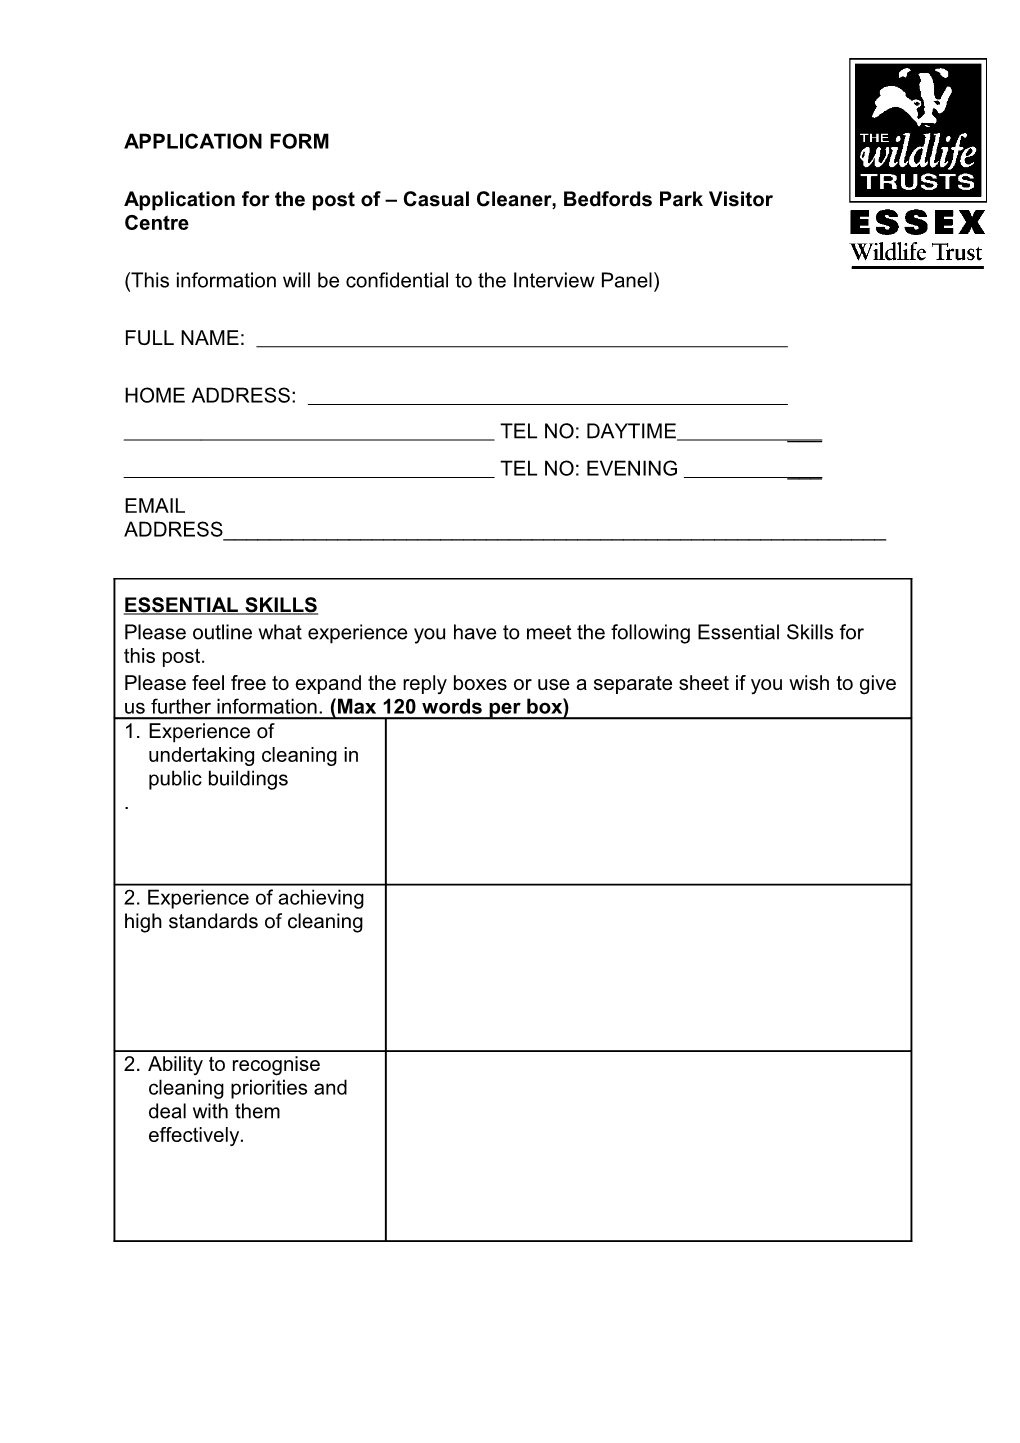 Application for the Post of Casual Cleaner, Bedfords Park Visitor Centre